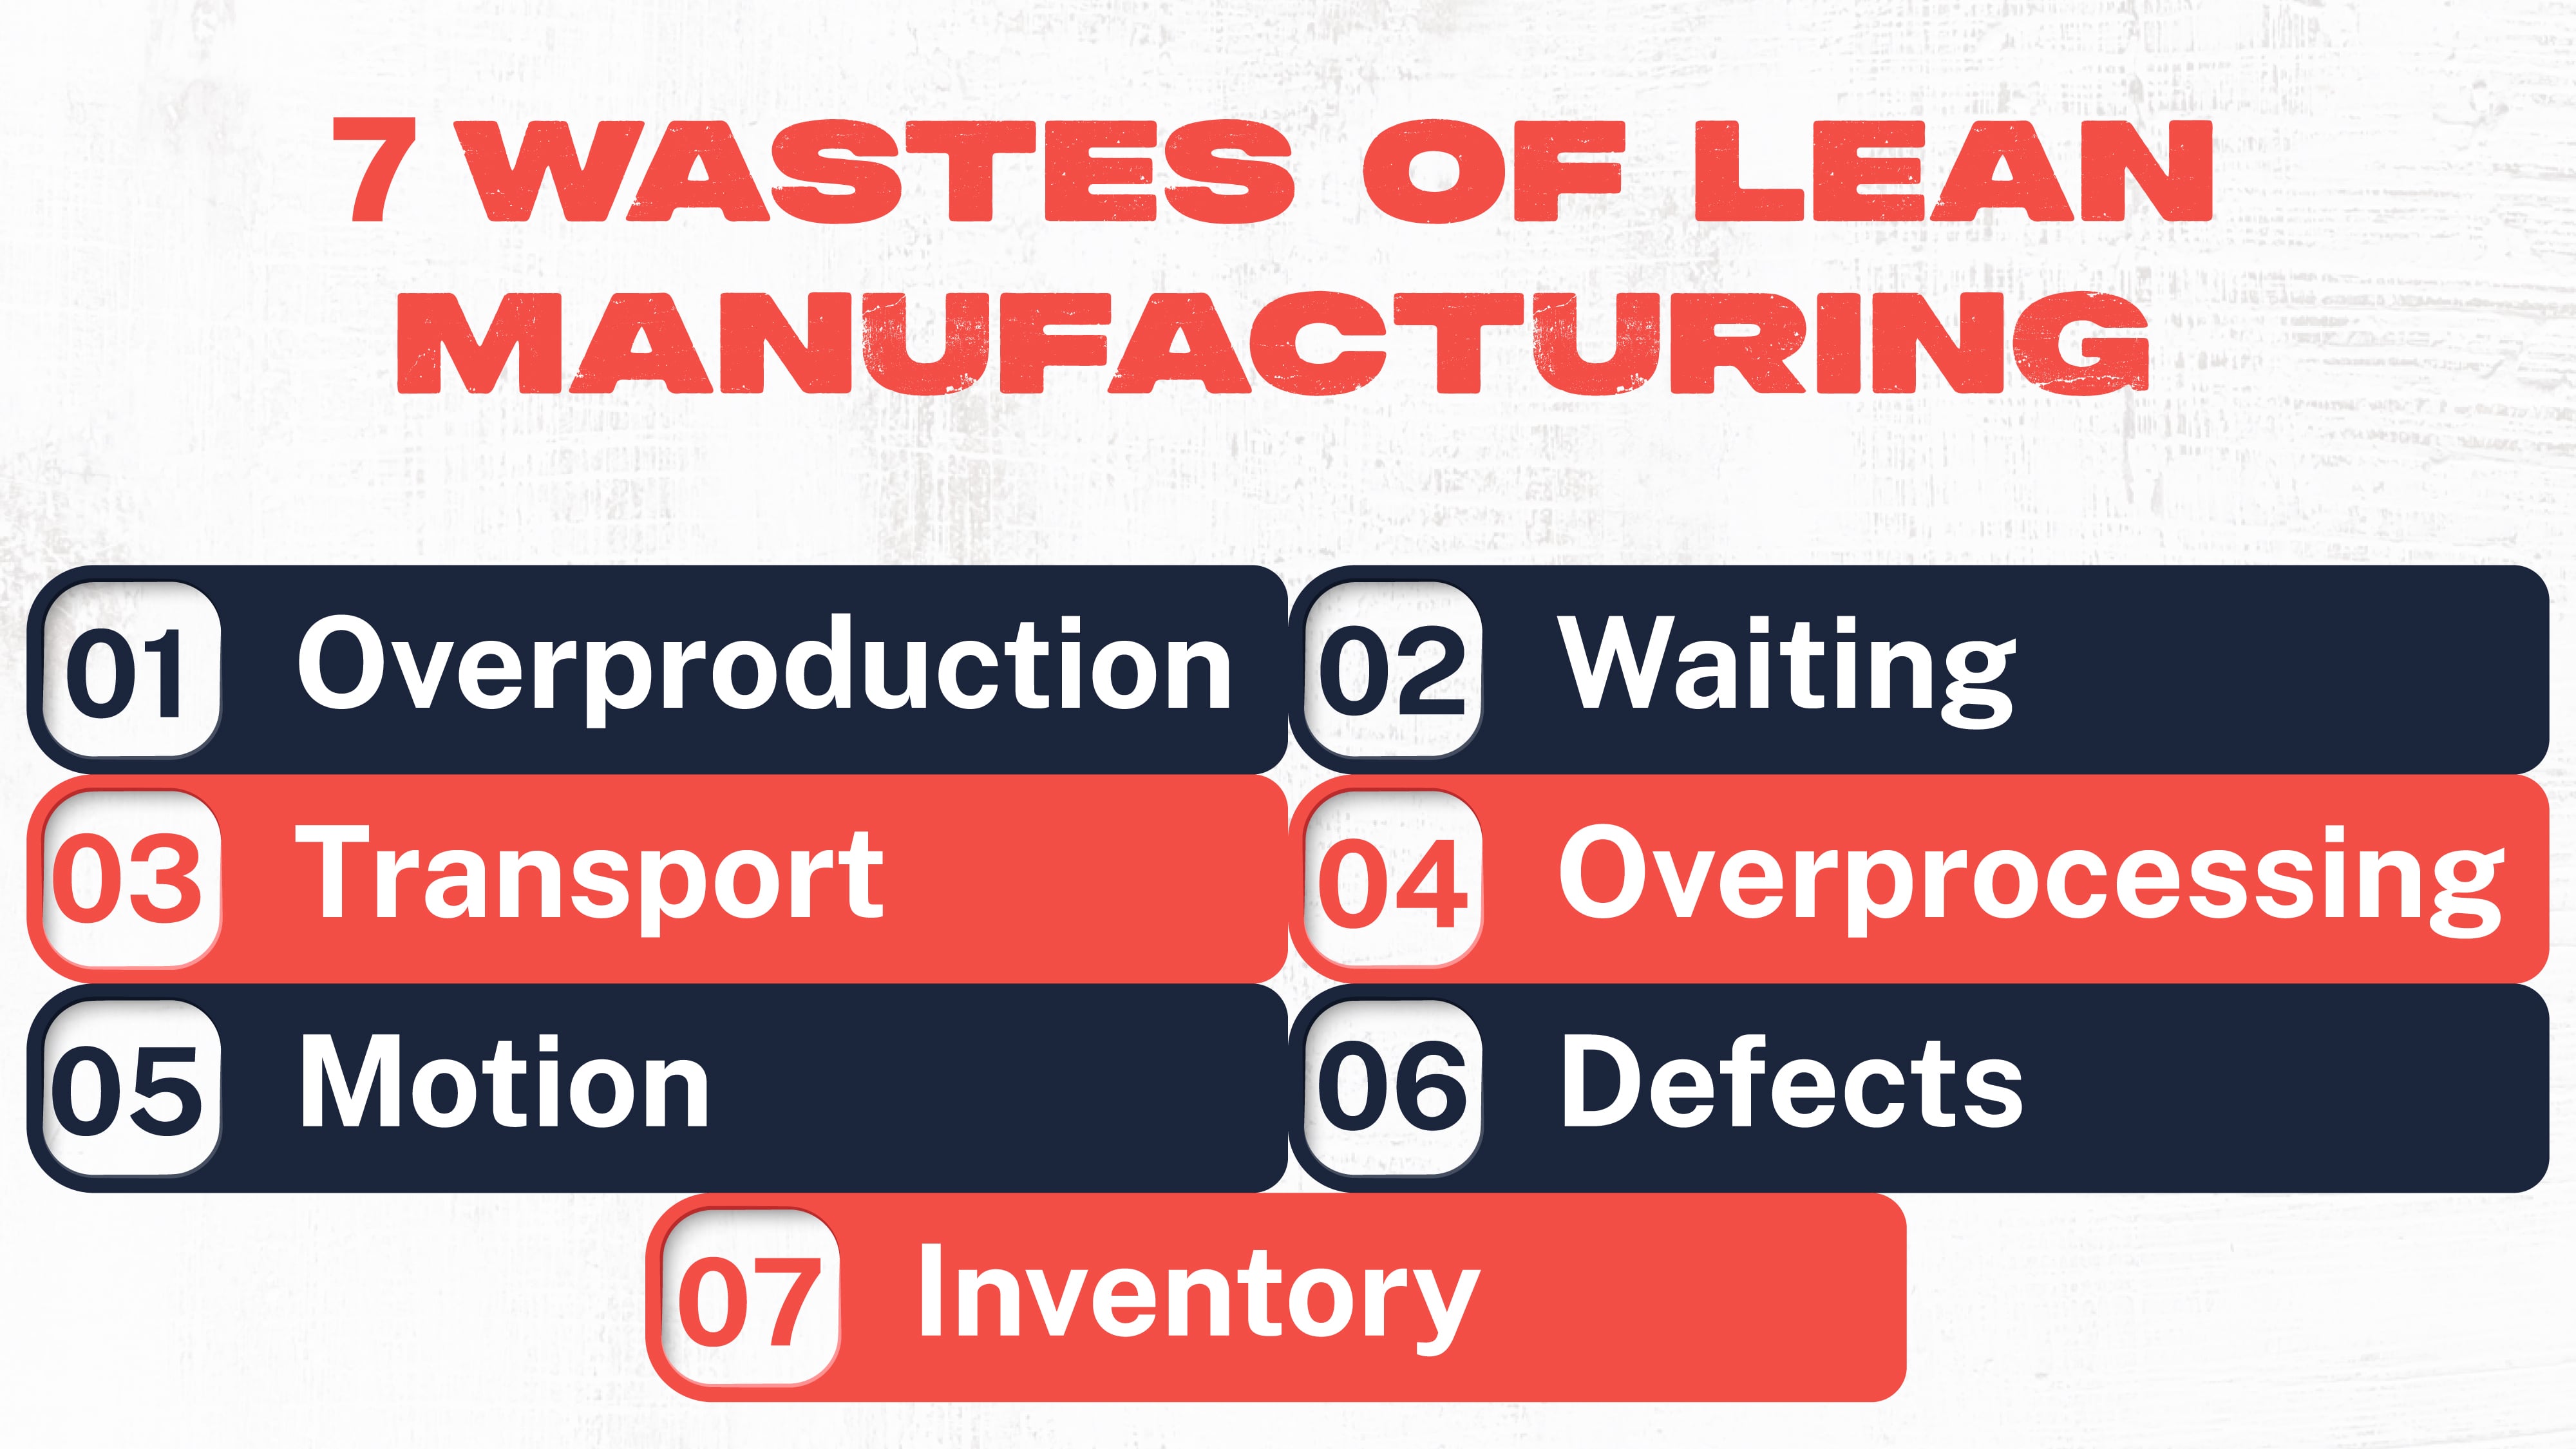 7 WASTES OF LEAN MANUFACTURING